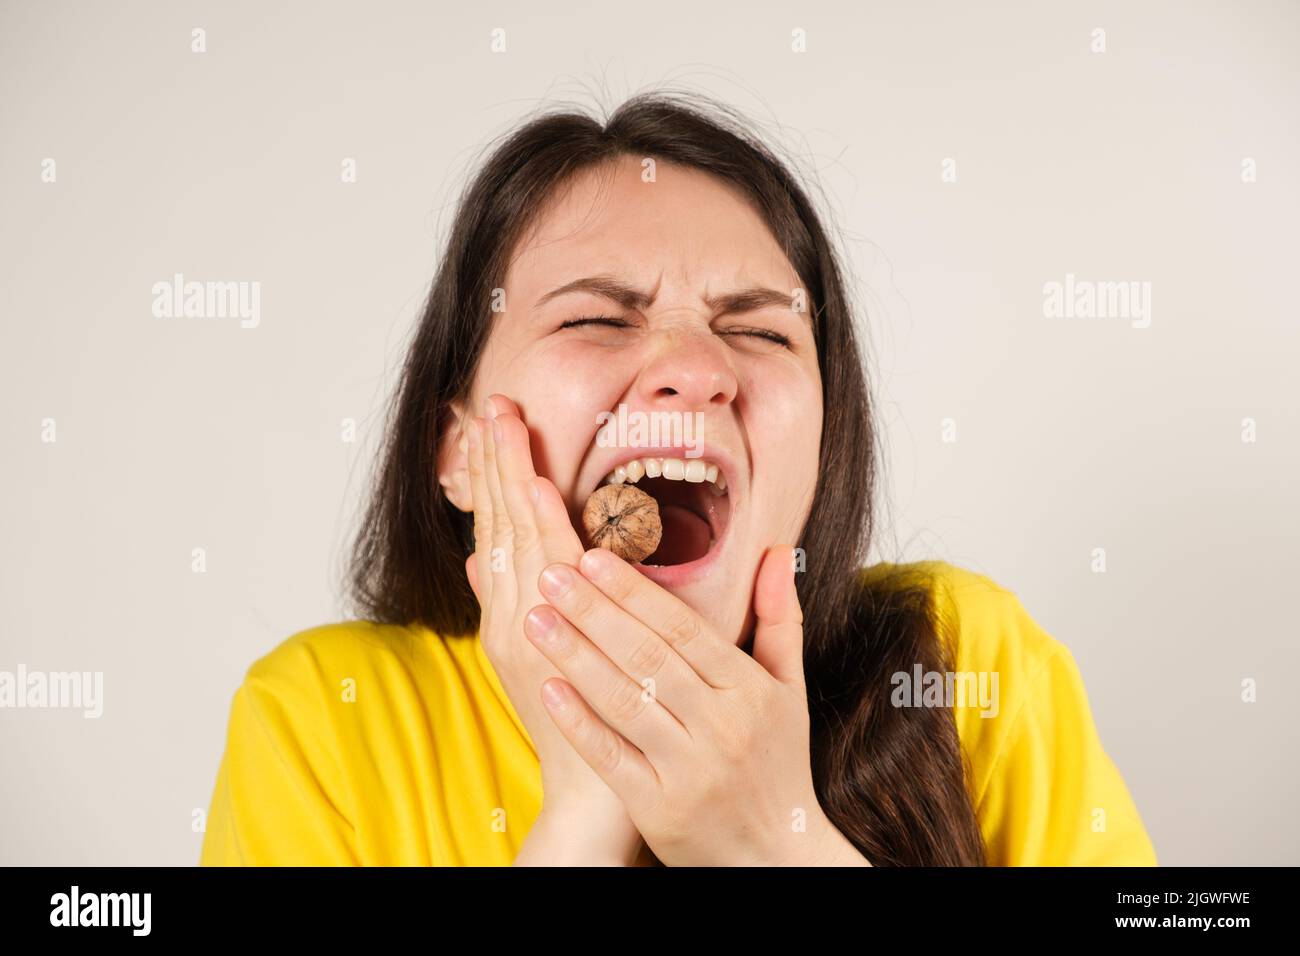 A woman gnaws on a walnut, opening her mouth wide, breaking a tooth or dislocating the temporomandibular joint, her jaw has moved away. Stock Photo